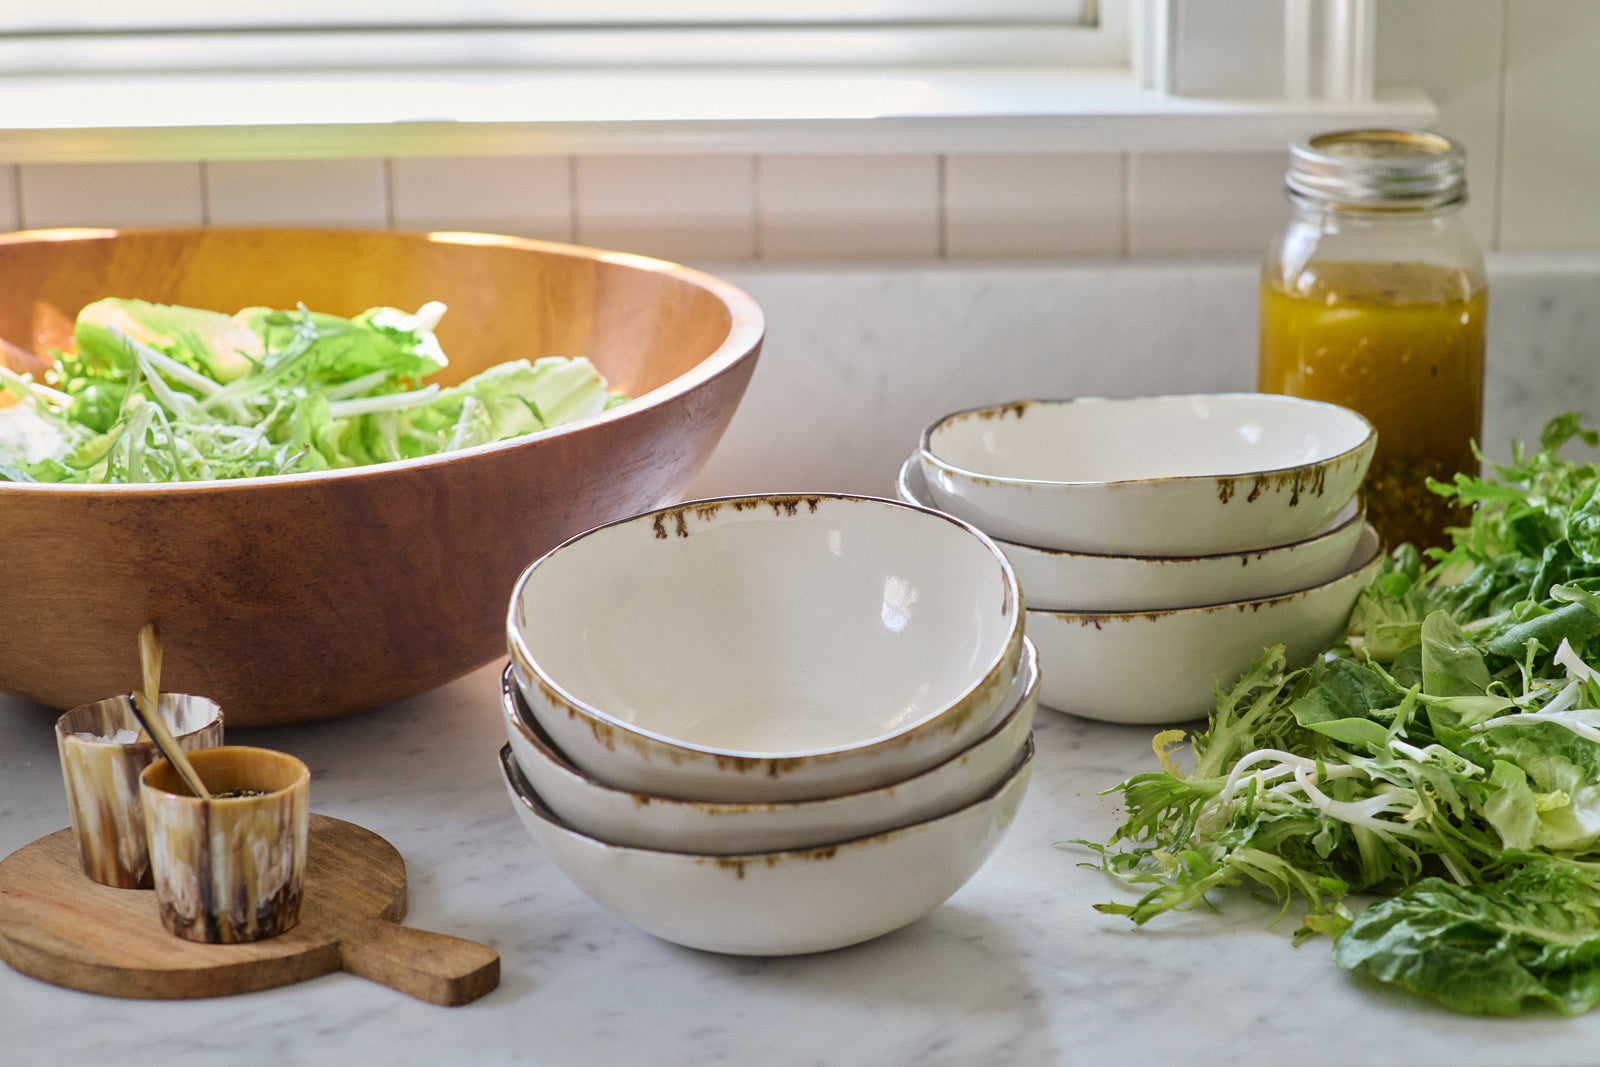 Two stacks of DBO HOME bronze drip bowls on a sunny marble kitchen counter with a big wooden salad bowl and salad greens piled on the table, plus small decorative salt and pepper dishes and a mason jar of homemade salad dressing.